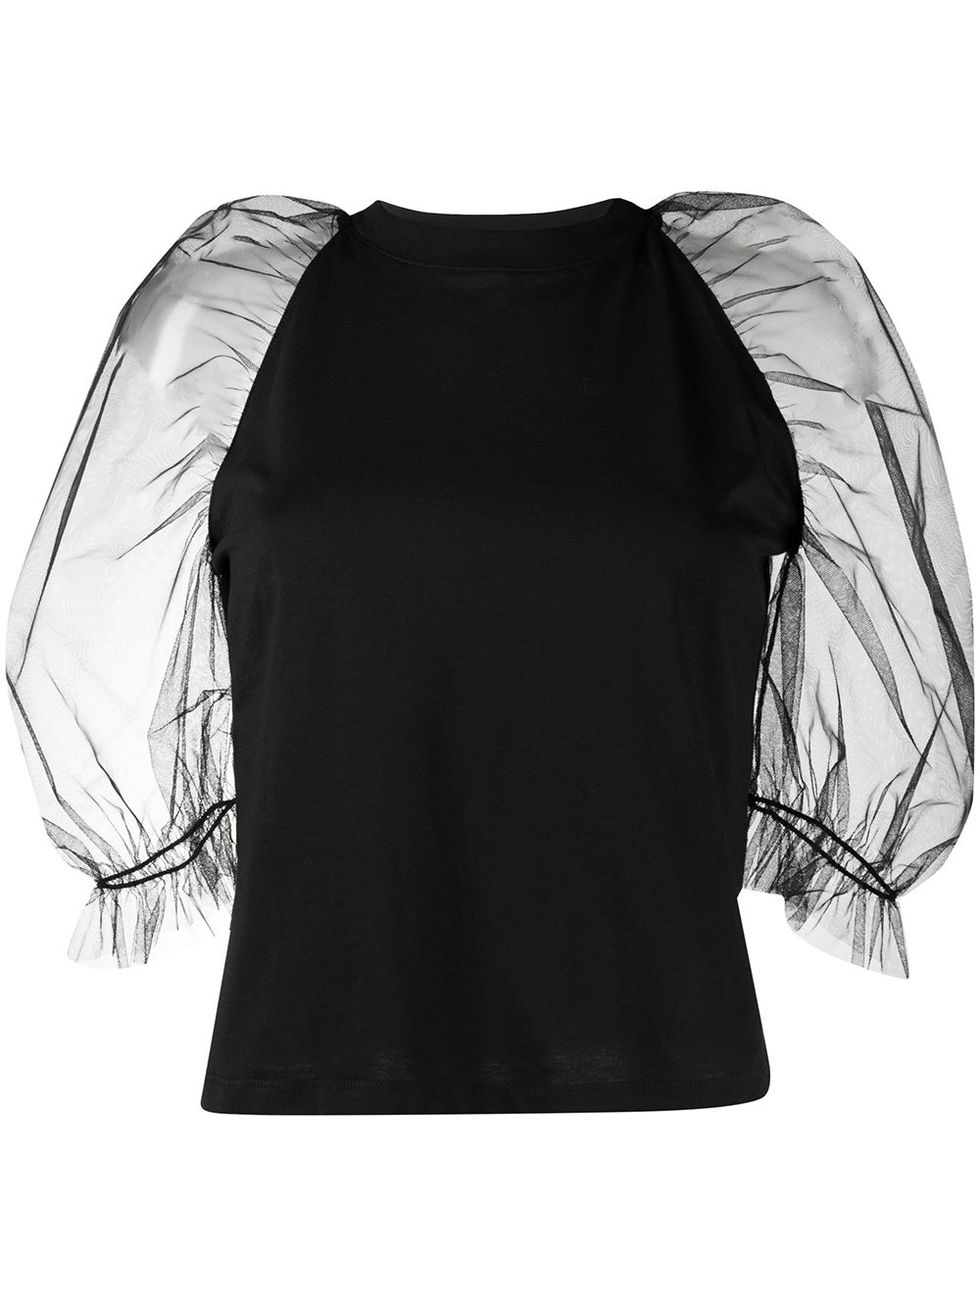 IL TOP IN TULLE